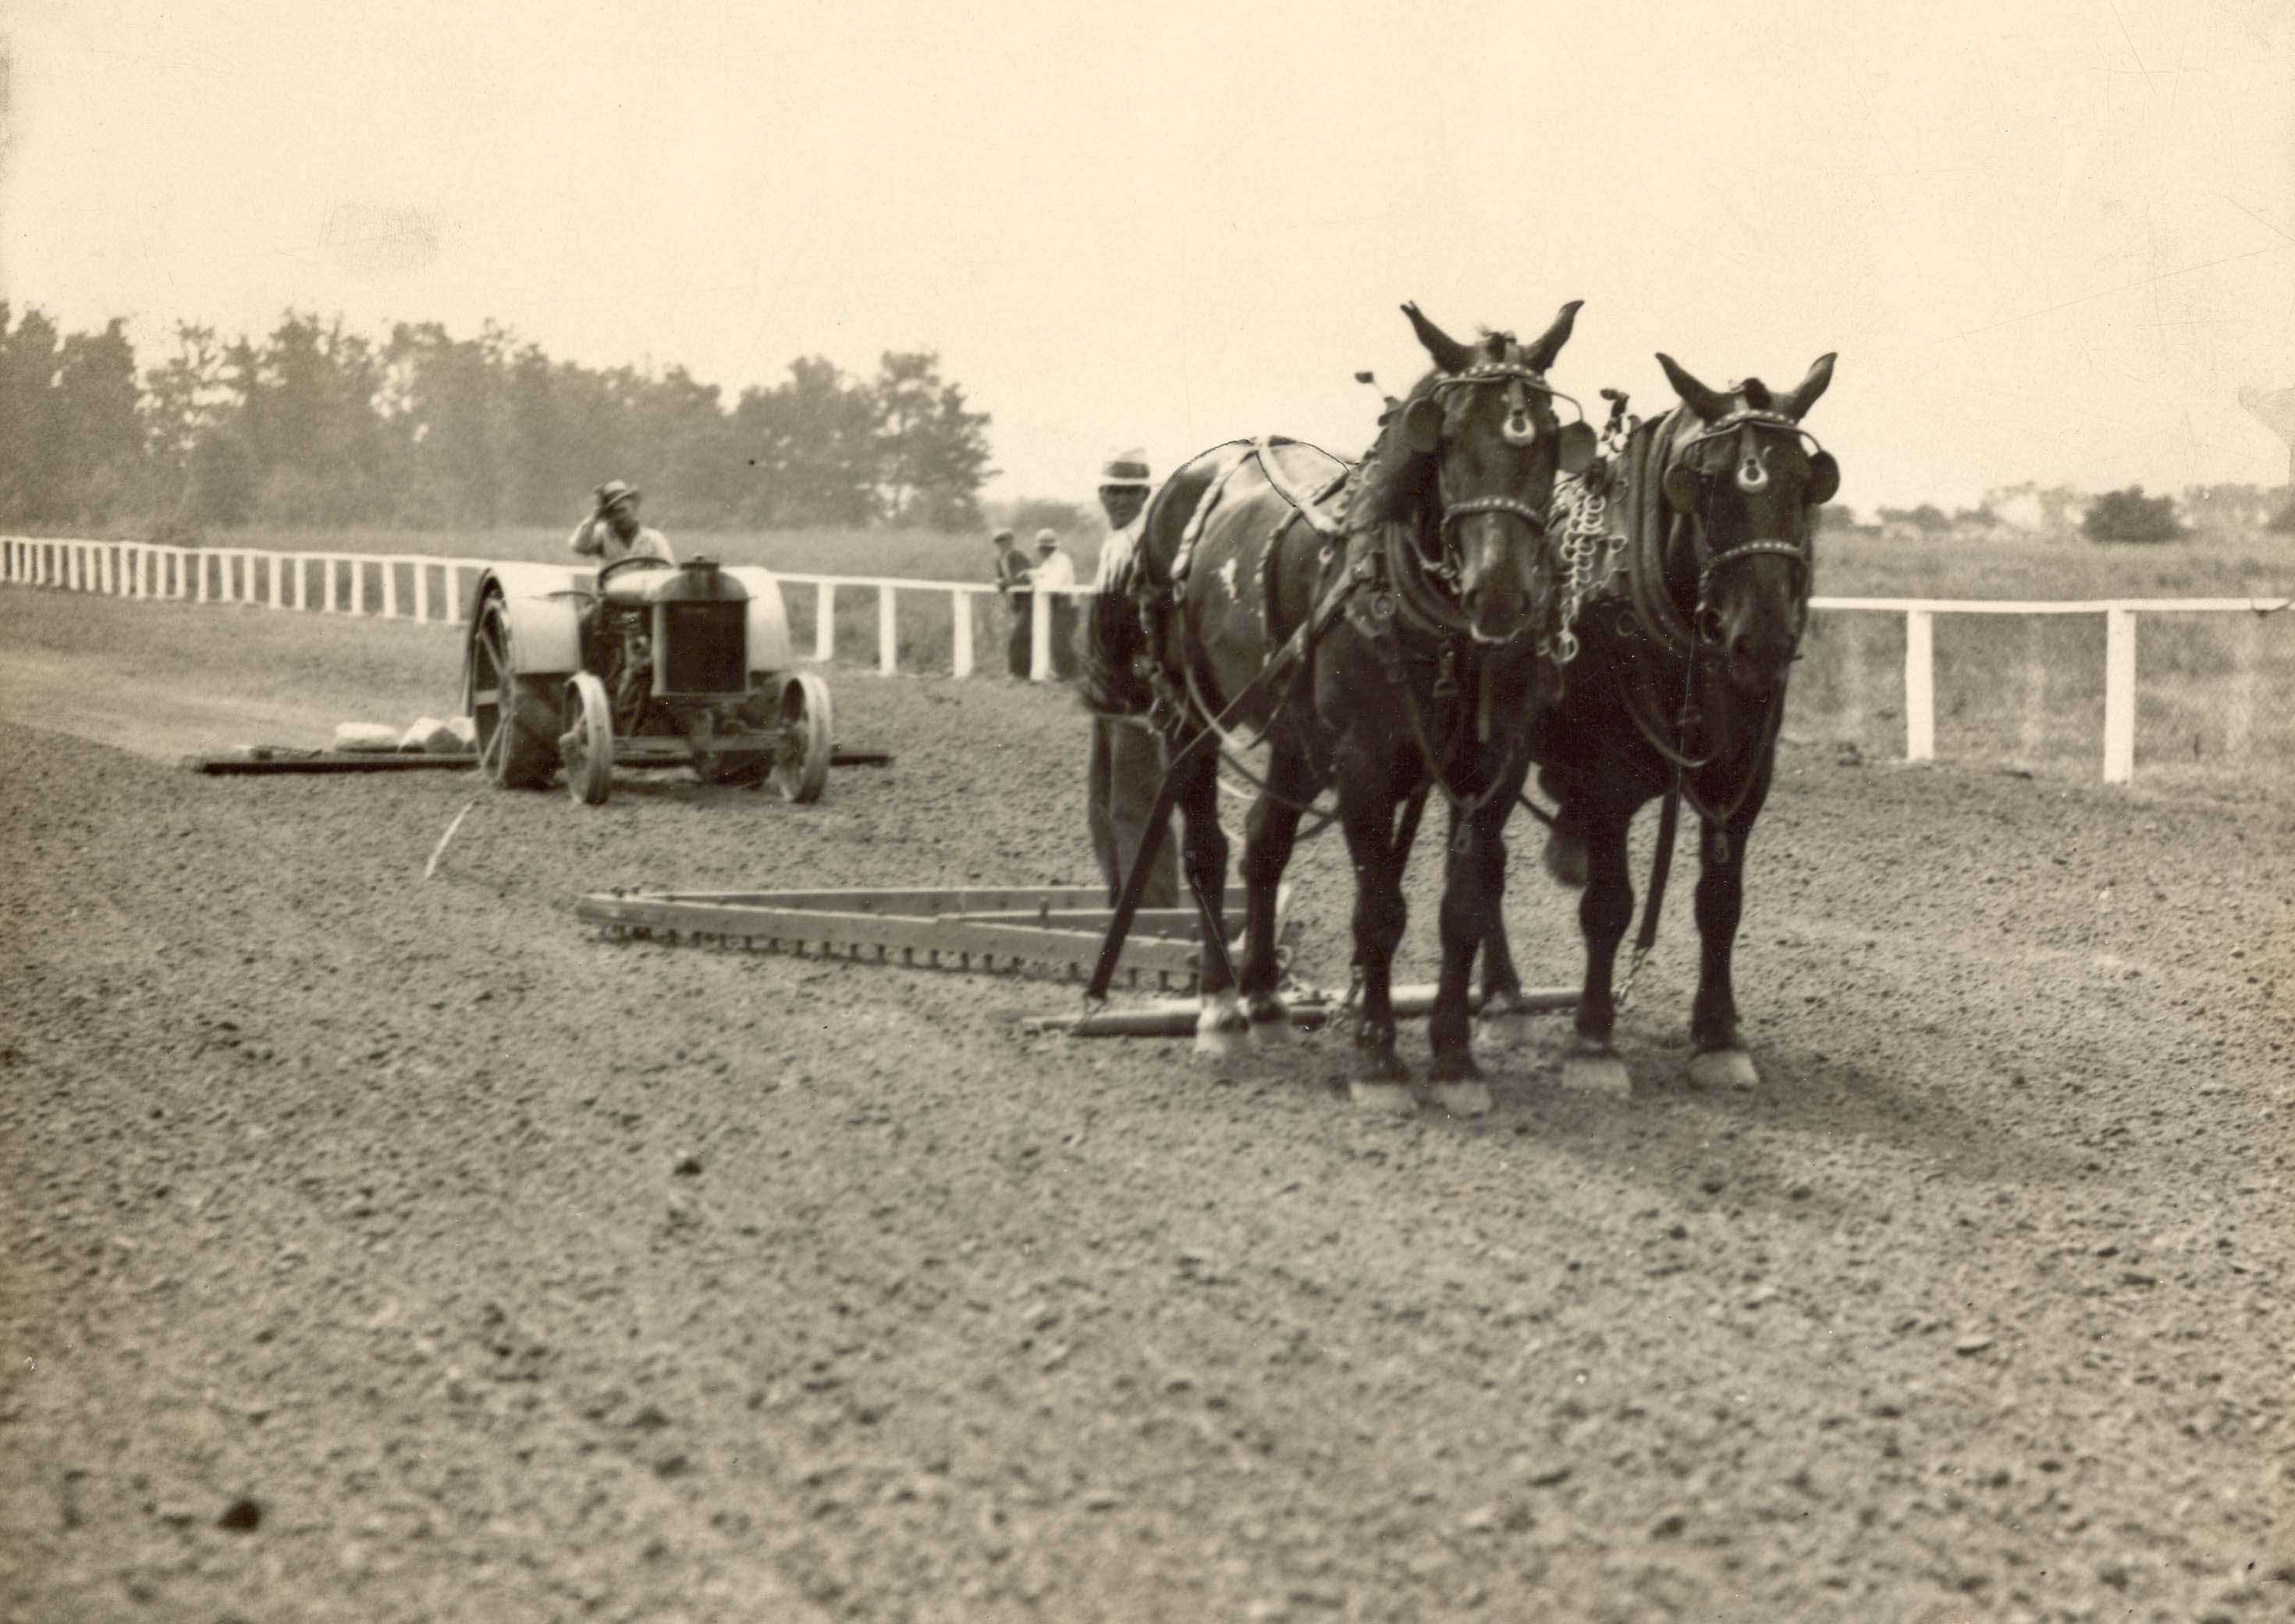 tractor%20%26%20horse-drawn%20ploughs%20grooming%20infield%20of%20the%20Kenilworth%20race%20track